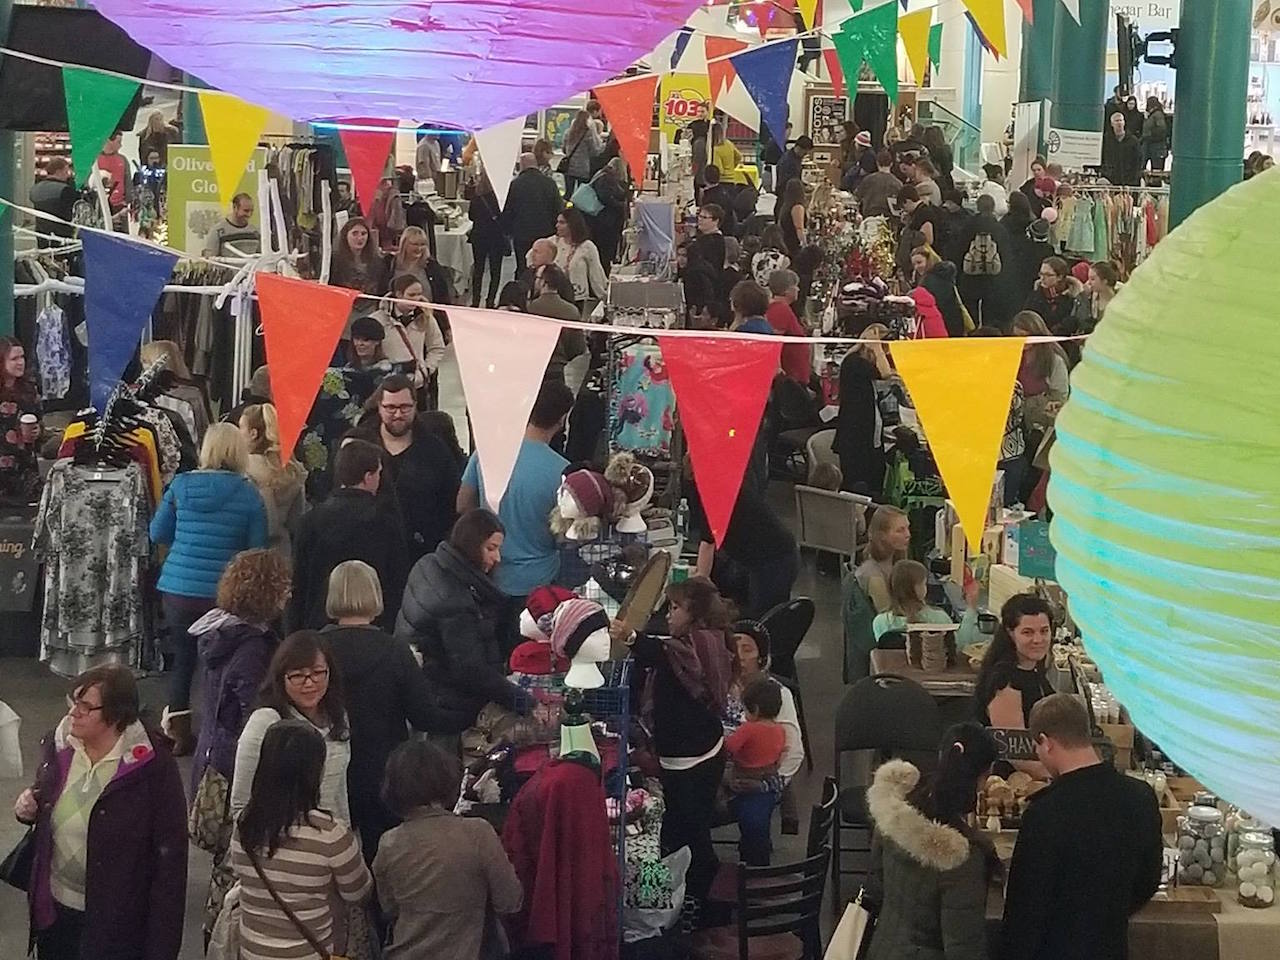 a crowd of people under colourful banners looking at tables selling crafts